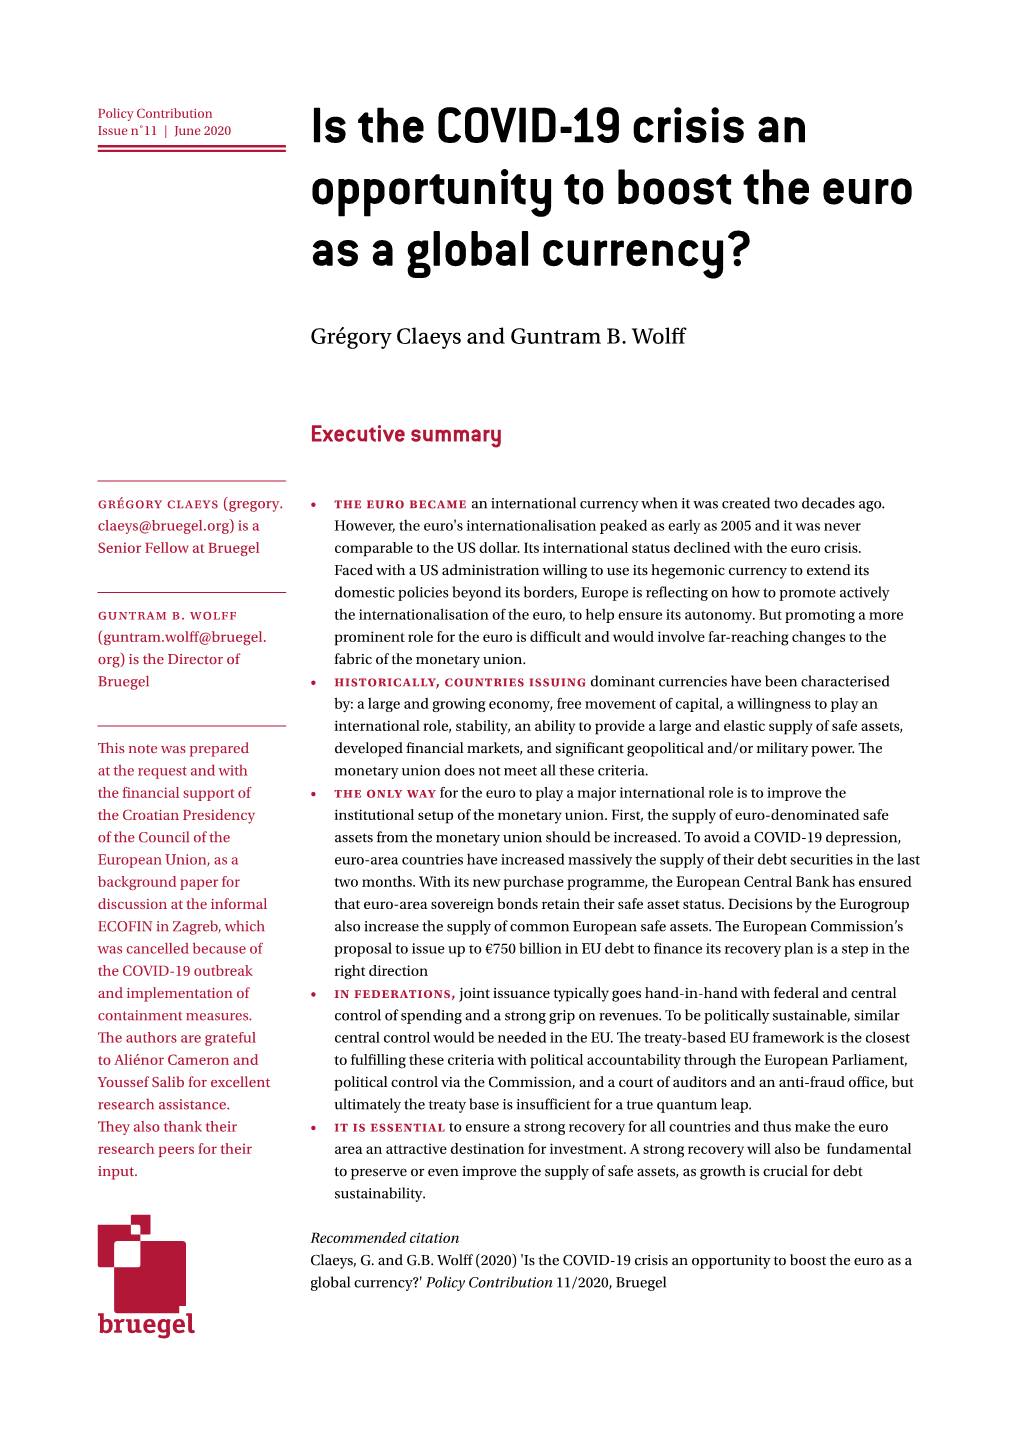 Is the COVID-19 Crisis an Opportunity to Boost the Euro As a Global Currency?